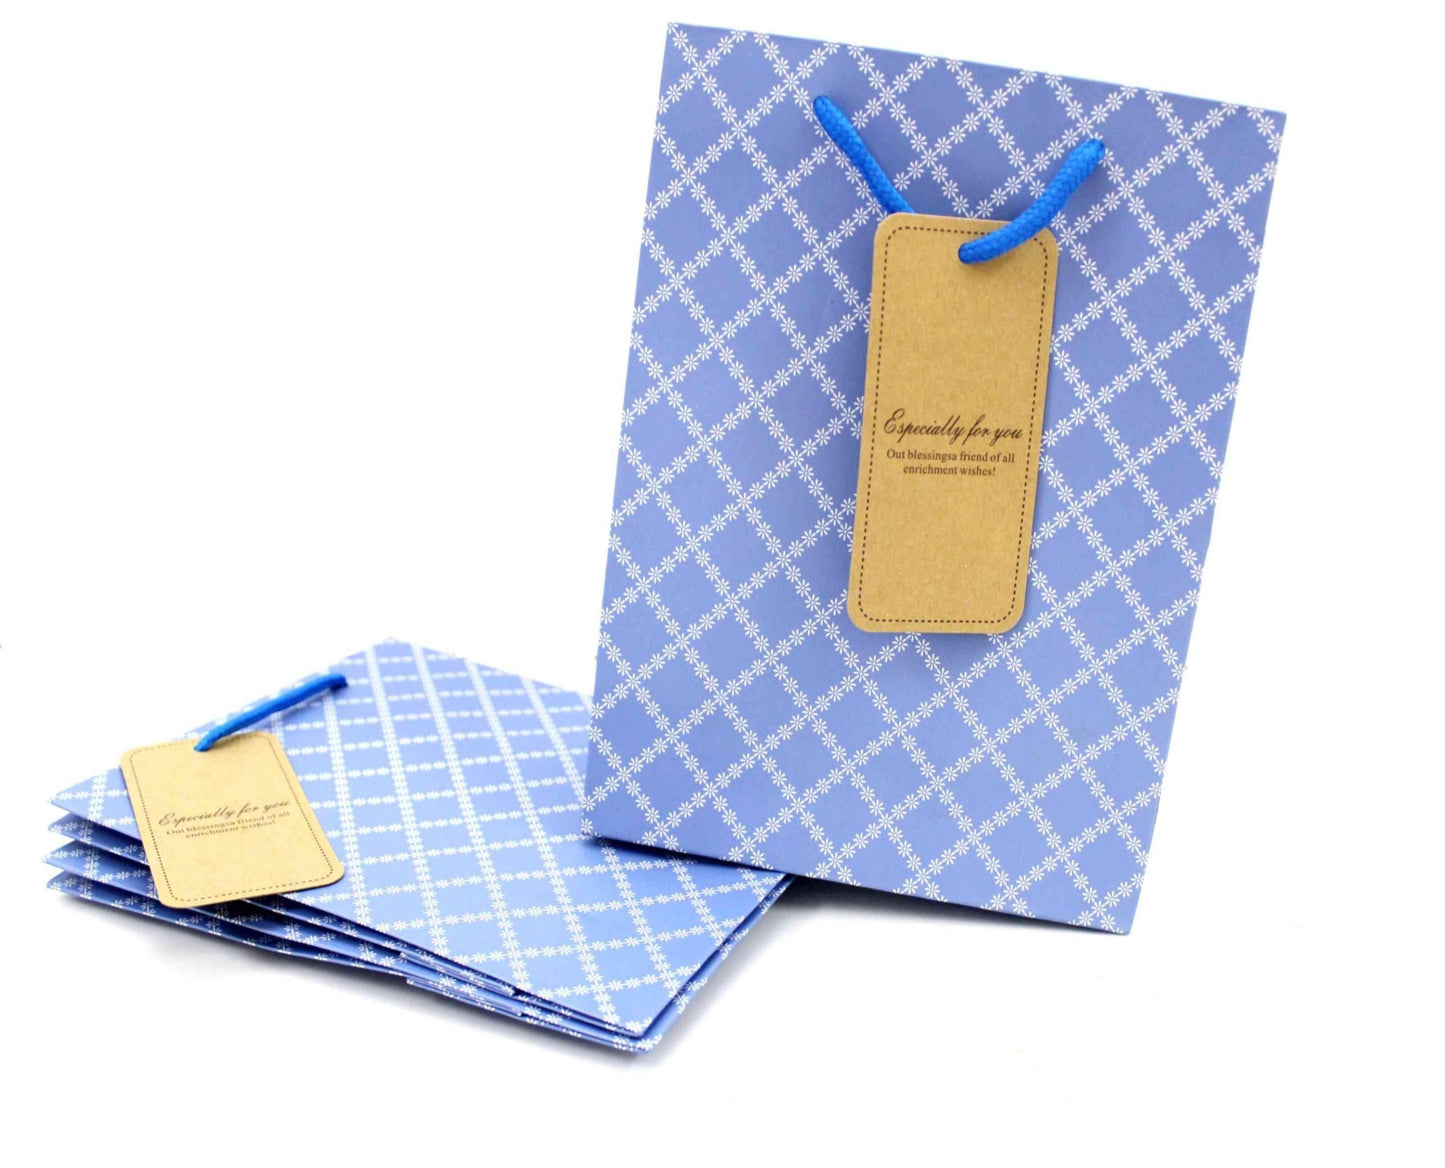 Indian Petals Durable Foldable and Reusable Paper Gift Bags (Pack of 10) Holds Up to 2Kg with supporting Handles, Small, Blue - Indian Petals